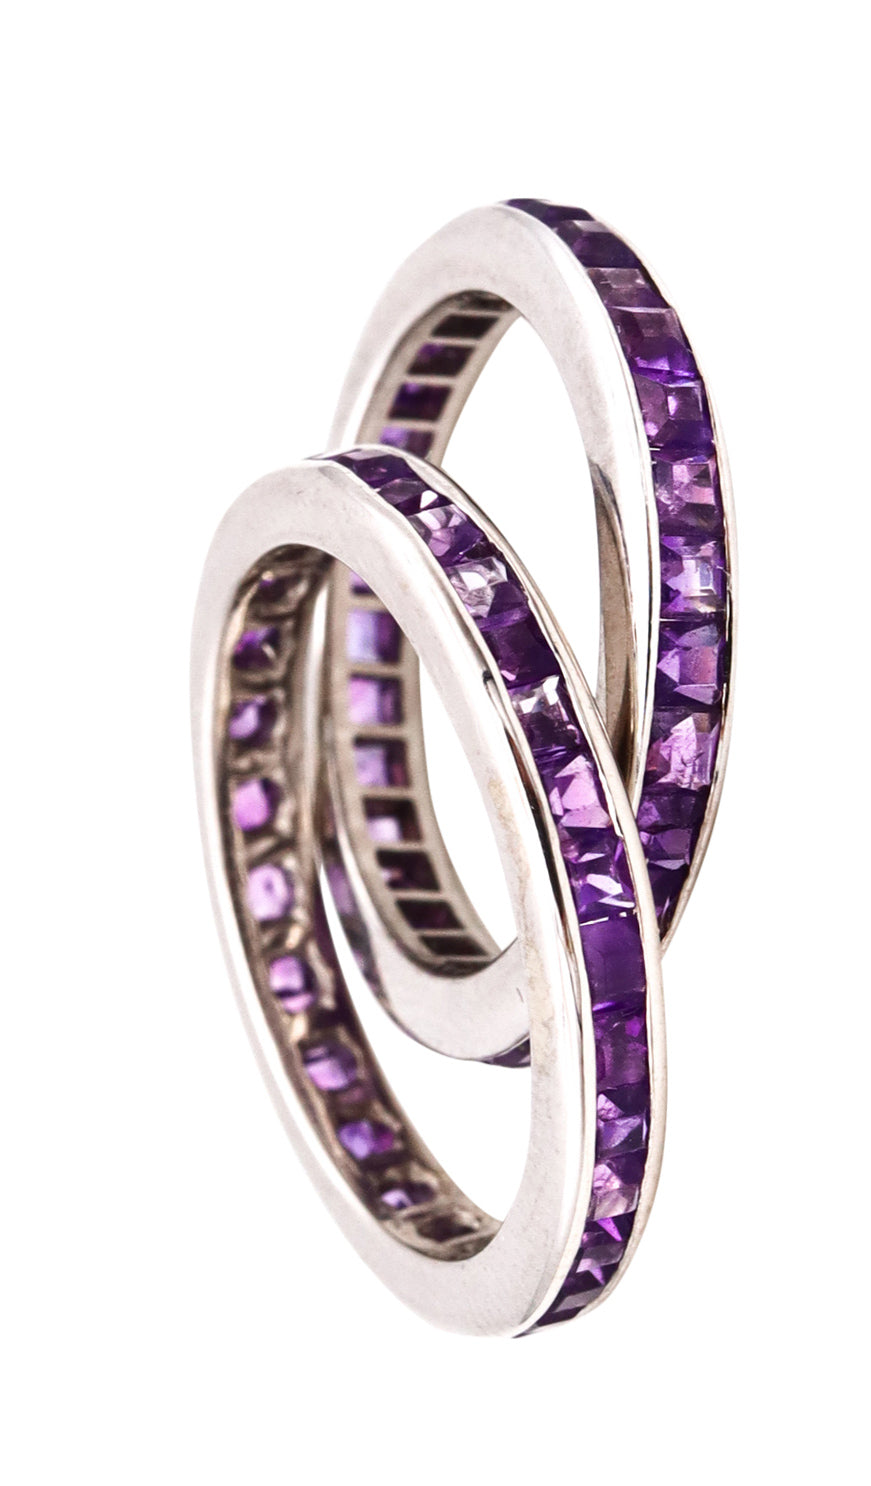 *Eternity band in .950 platinum with 1.80 cts in violet sapphires from Madagascar